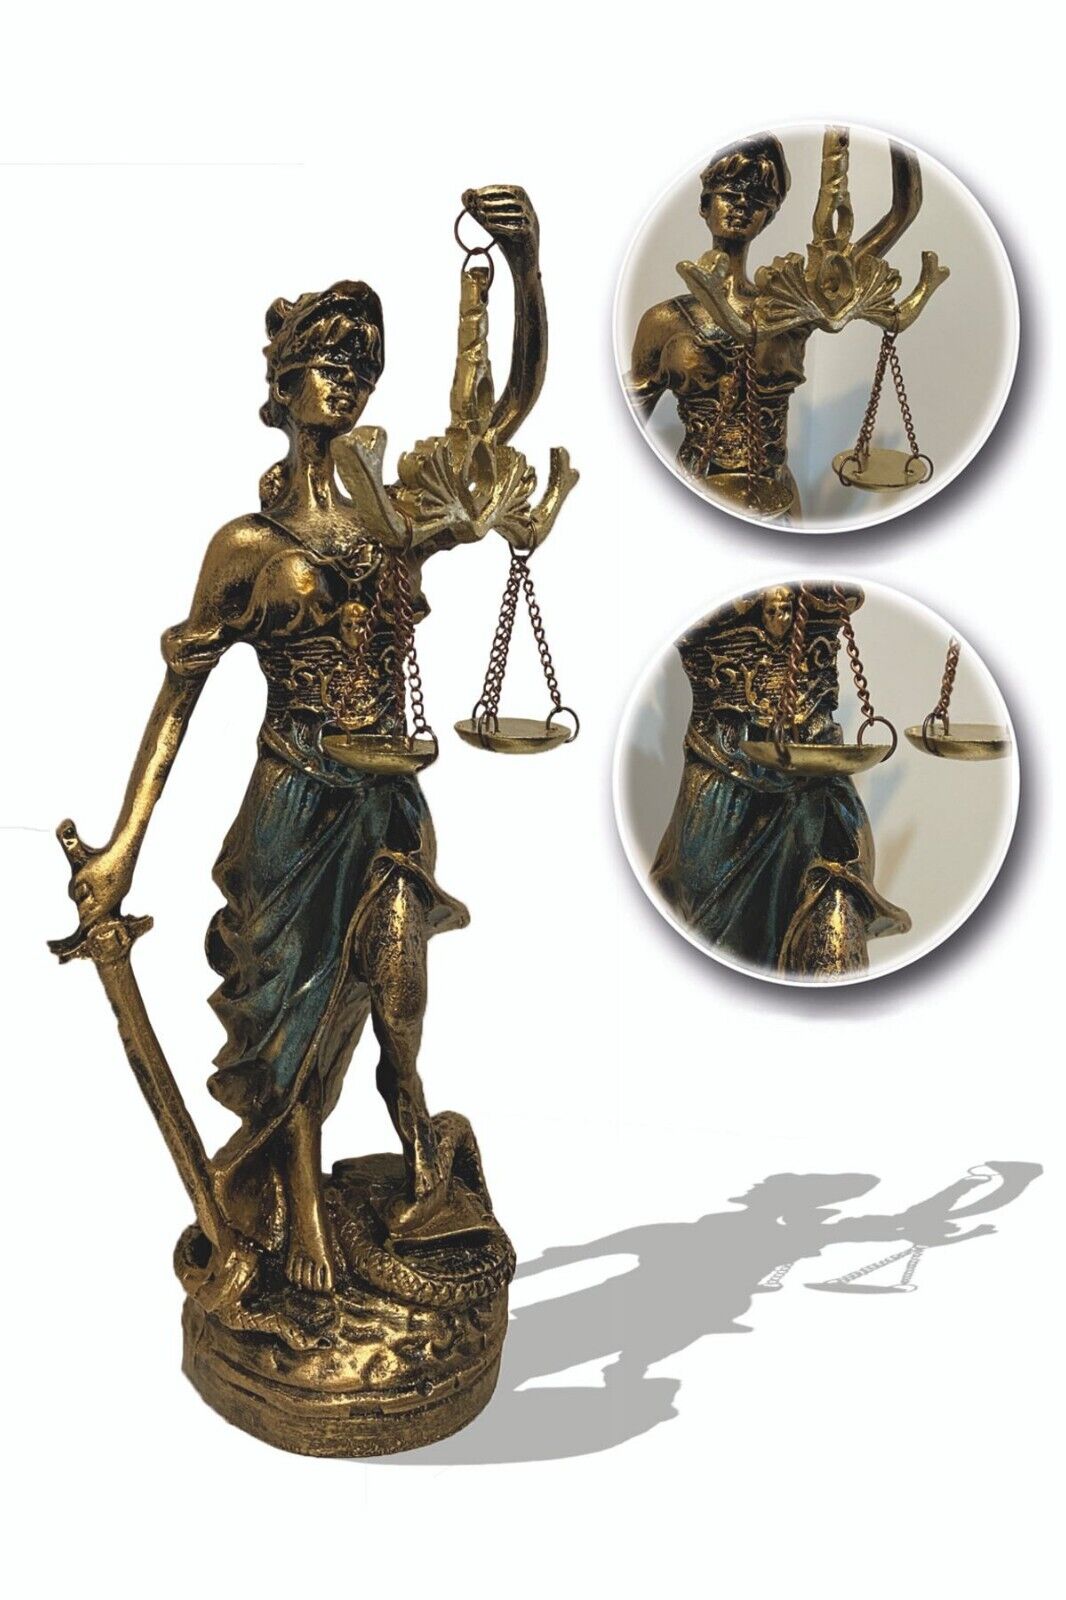 Decorative Blind Lady Justice Themis Goddess Sculpture 20 Cm Statue Gift